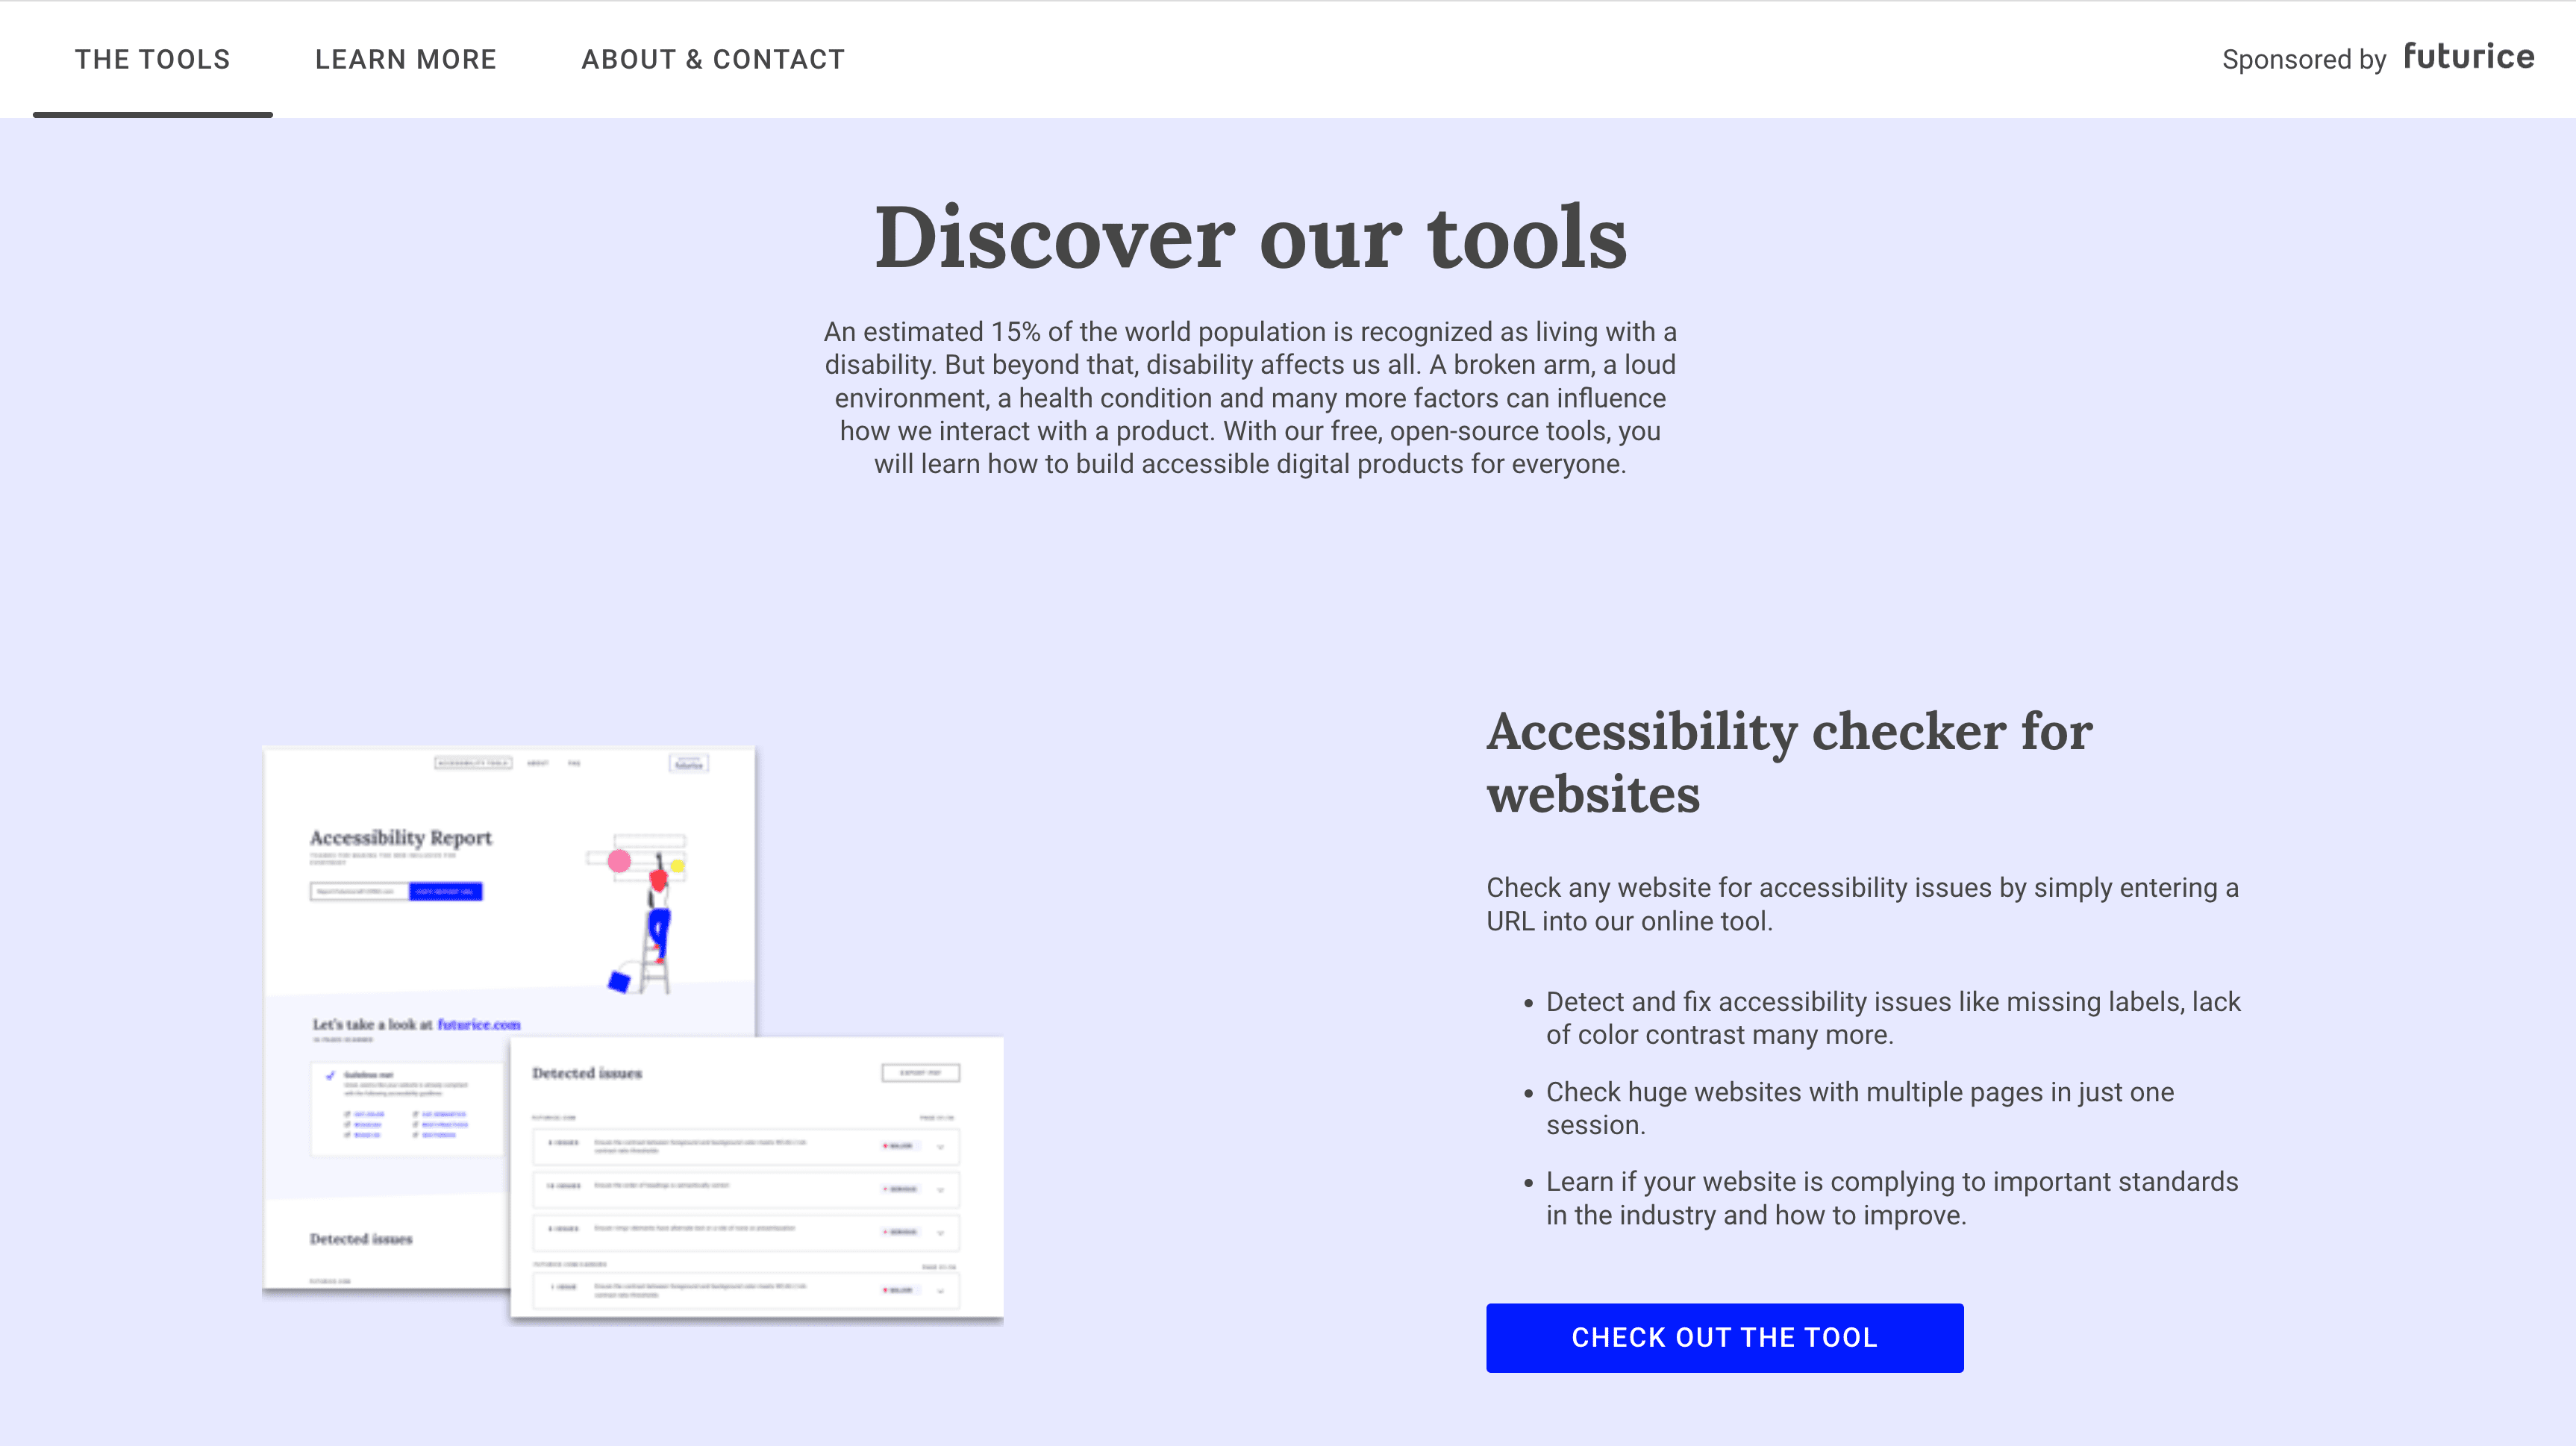 Accessibility checker for websites